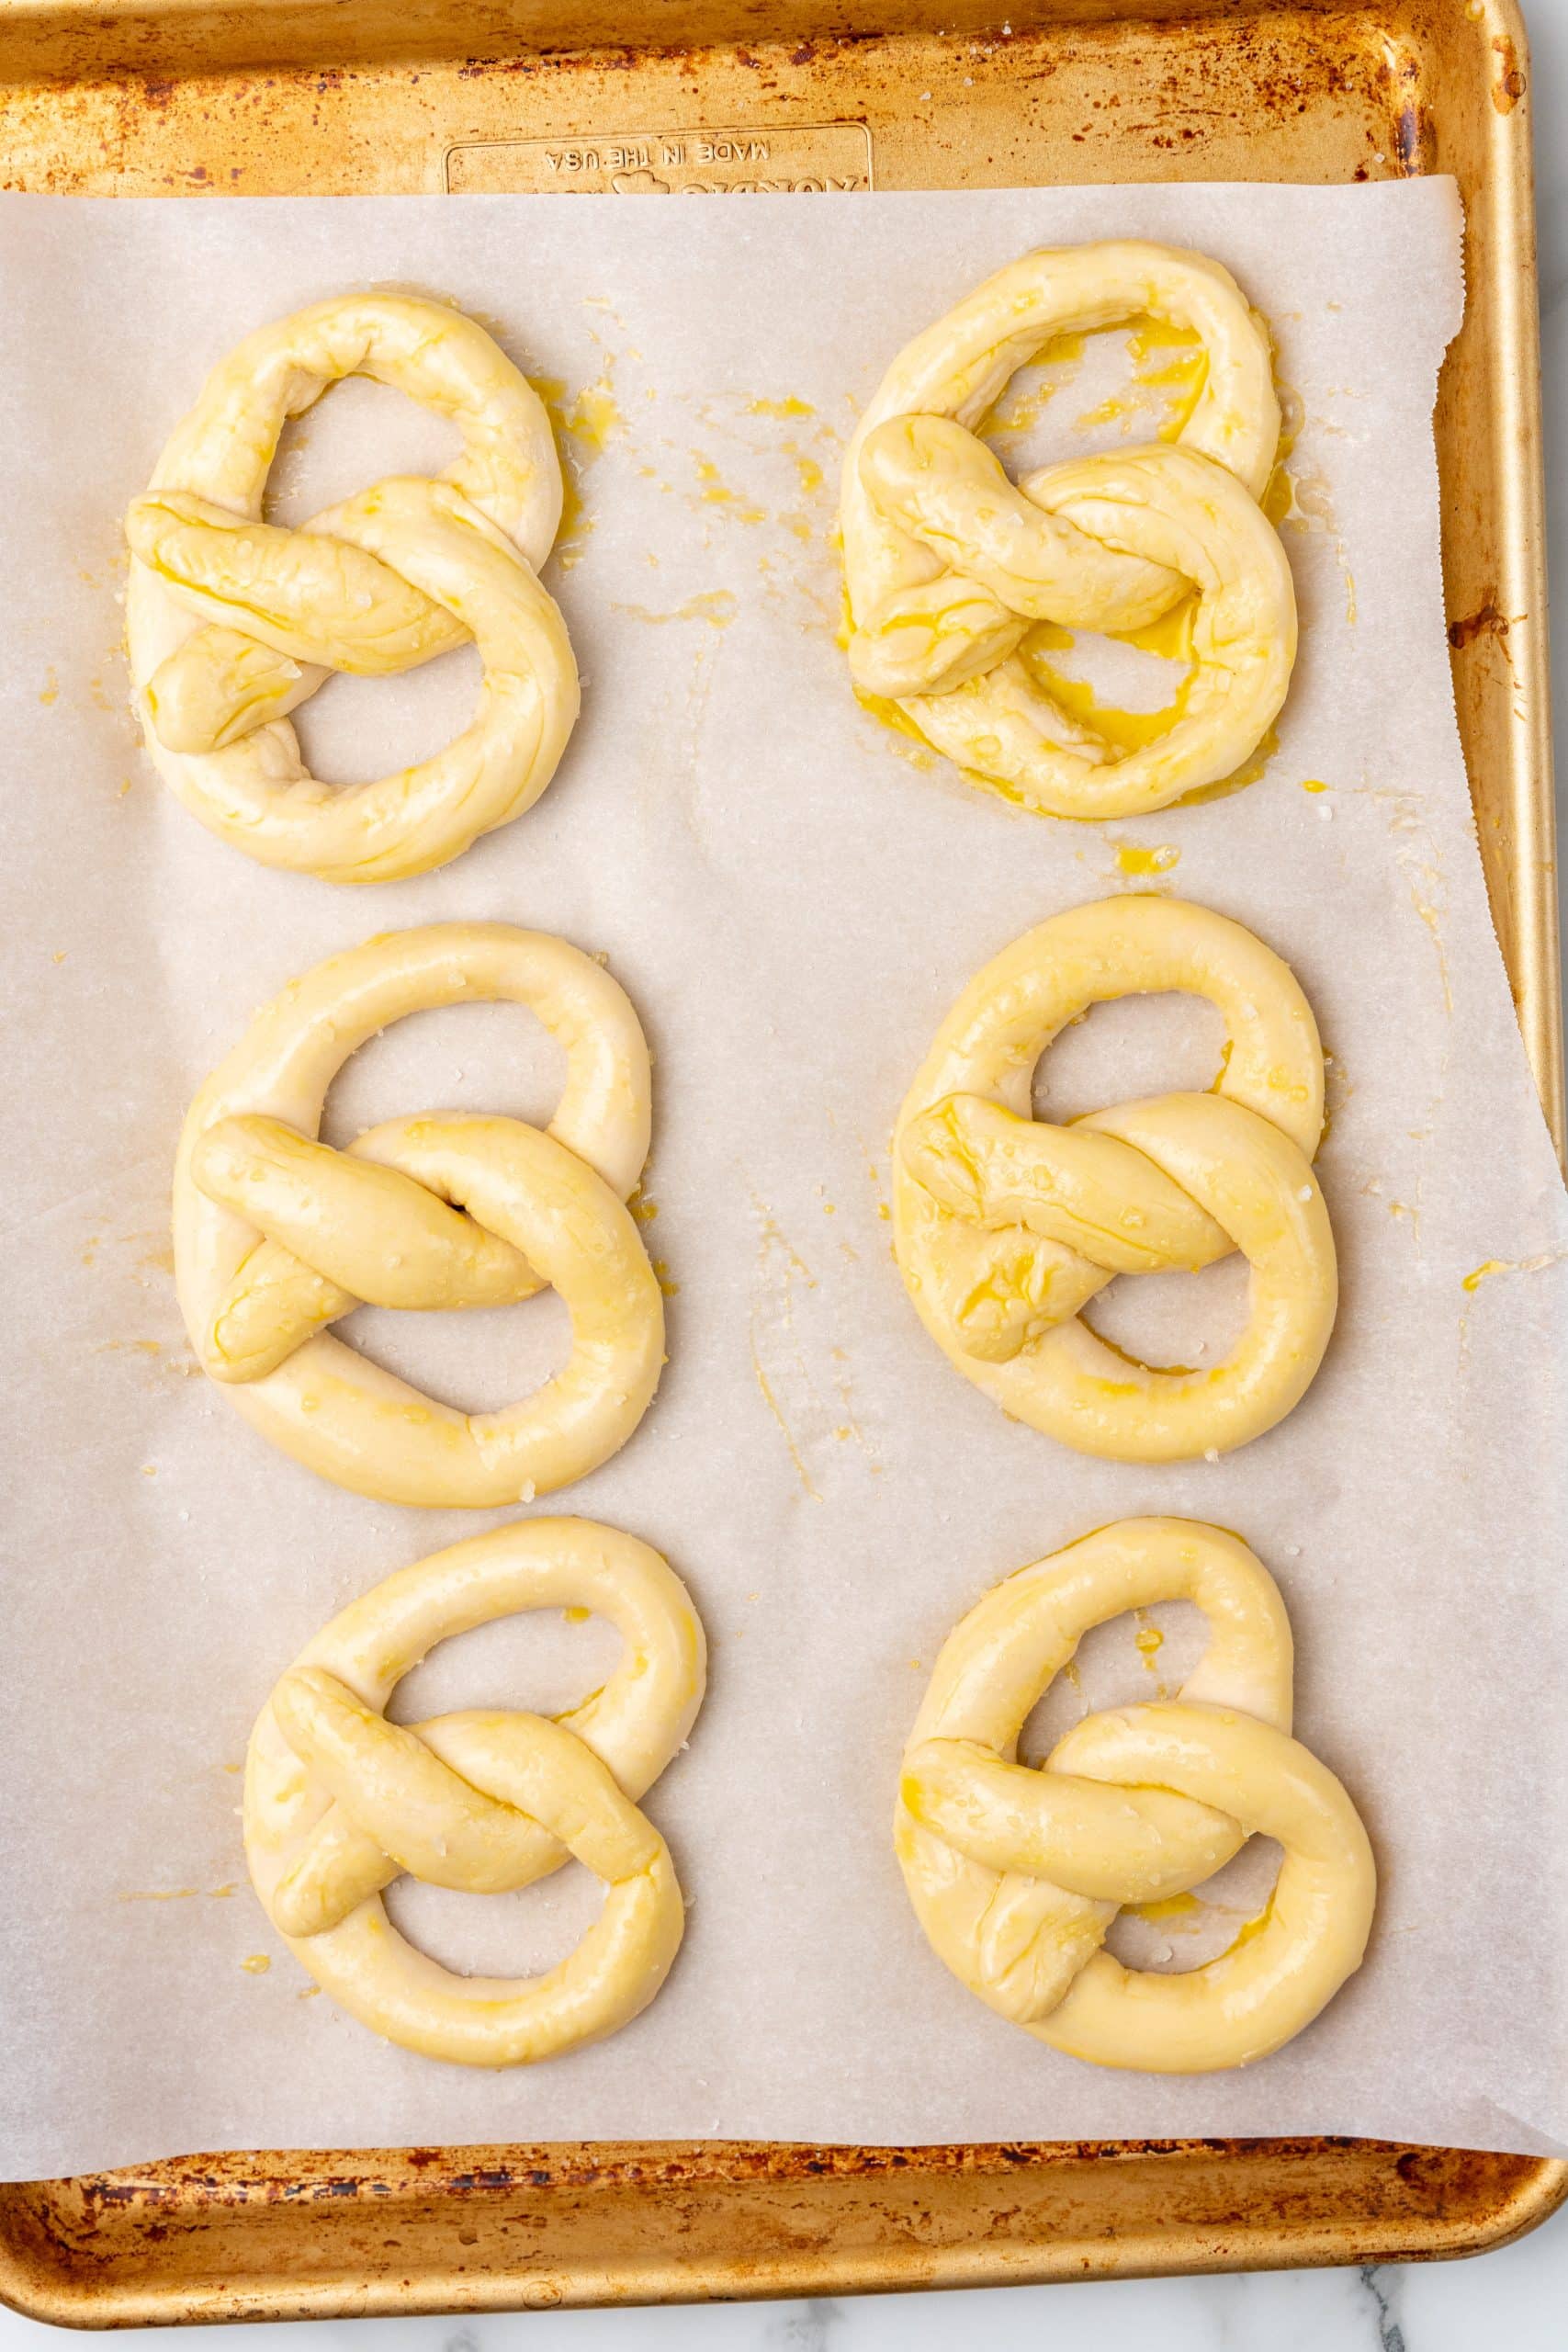 unbaked egg basted 30 minute soft pretzels on a parchment paper lined baking sheet